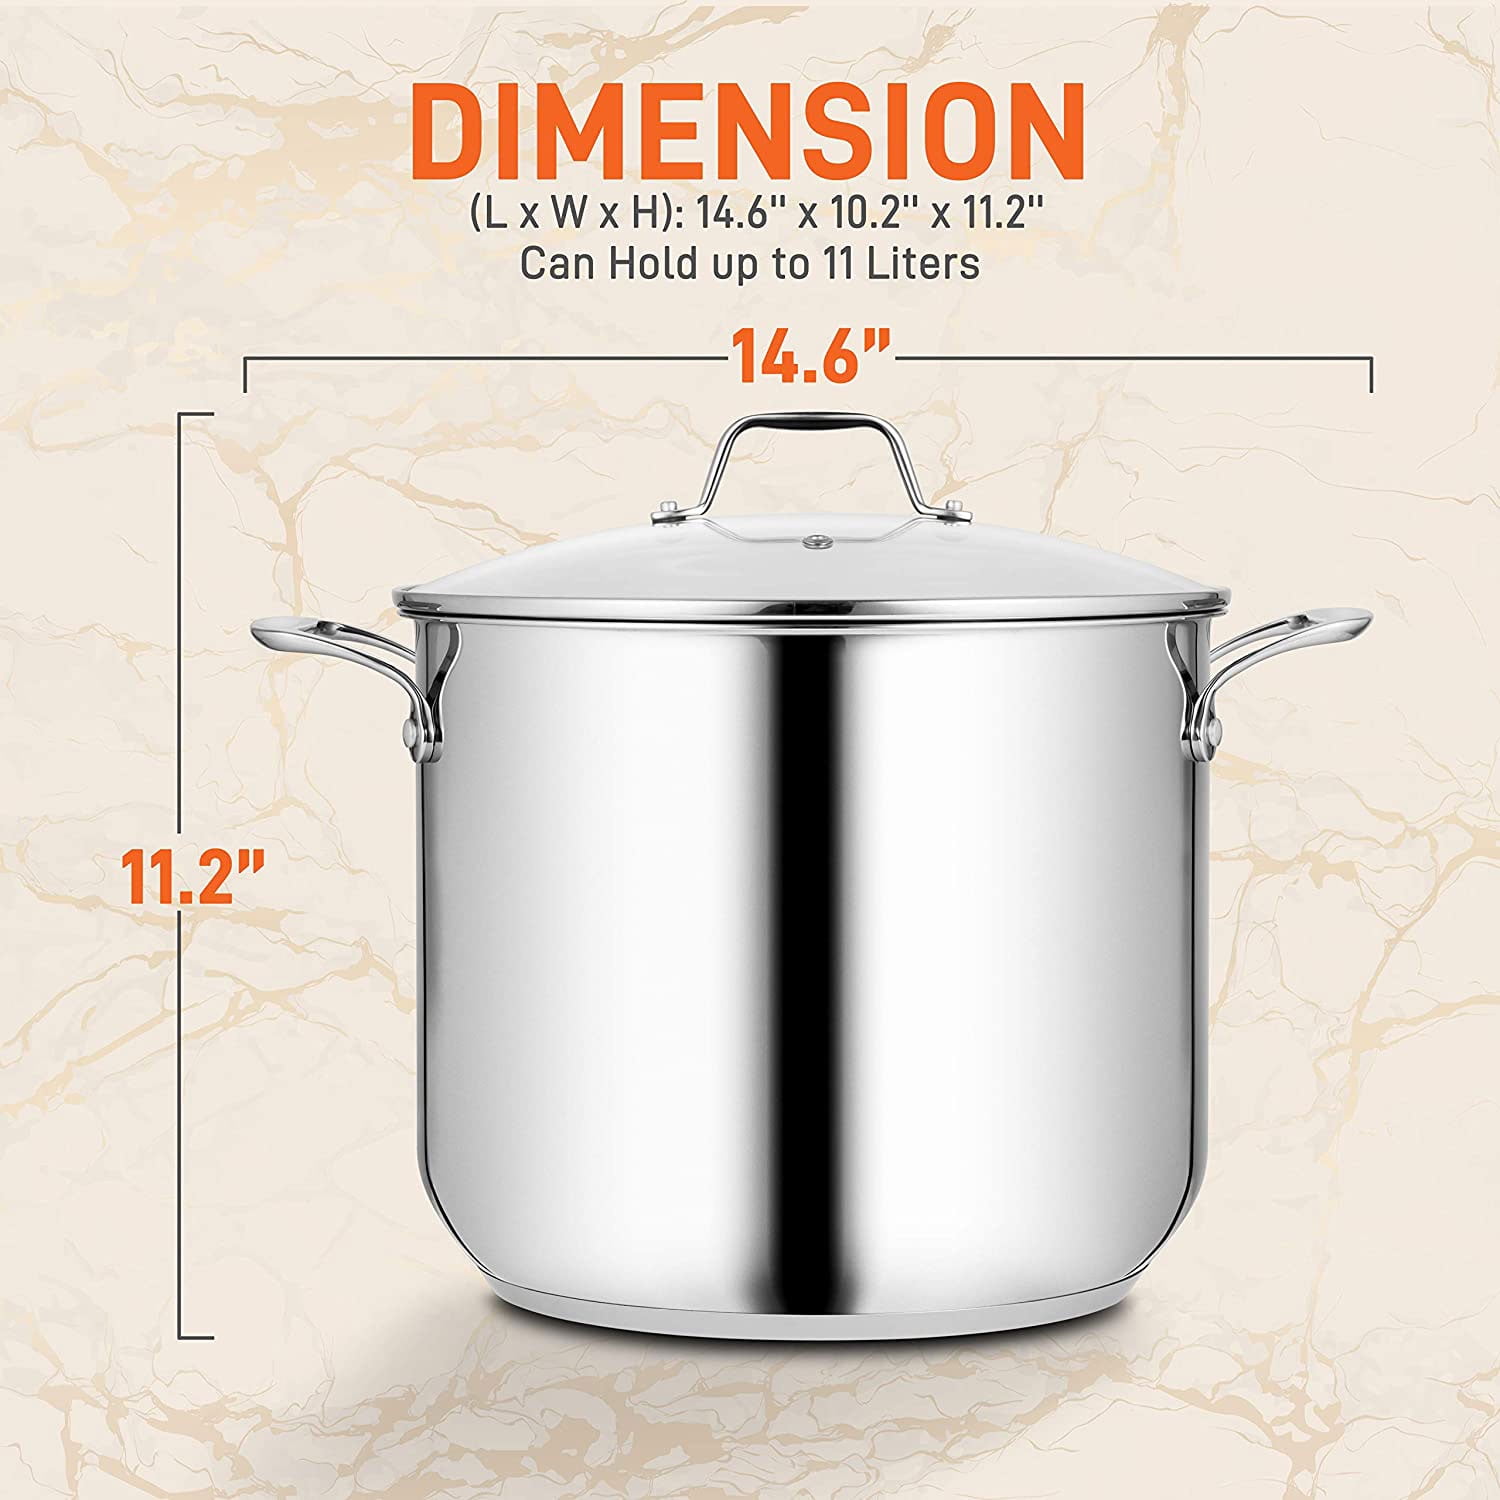 Stockpot – 2 Quart – Brushed Stainless Steel – Heavy Duty Induction Pot with Lid and Riveted Handles – for Soup, Seafood, Stock, Canning and for